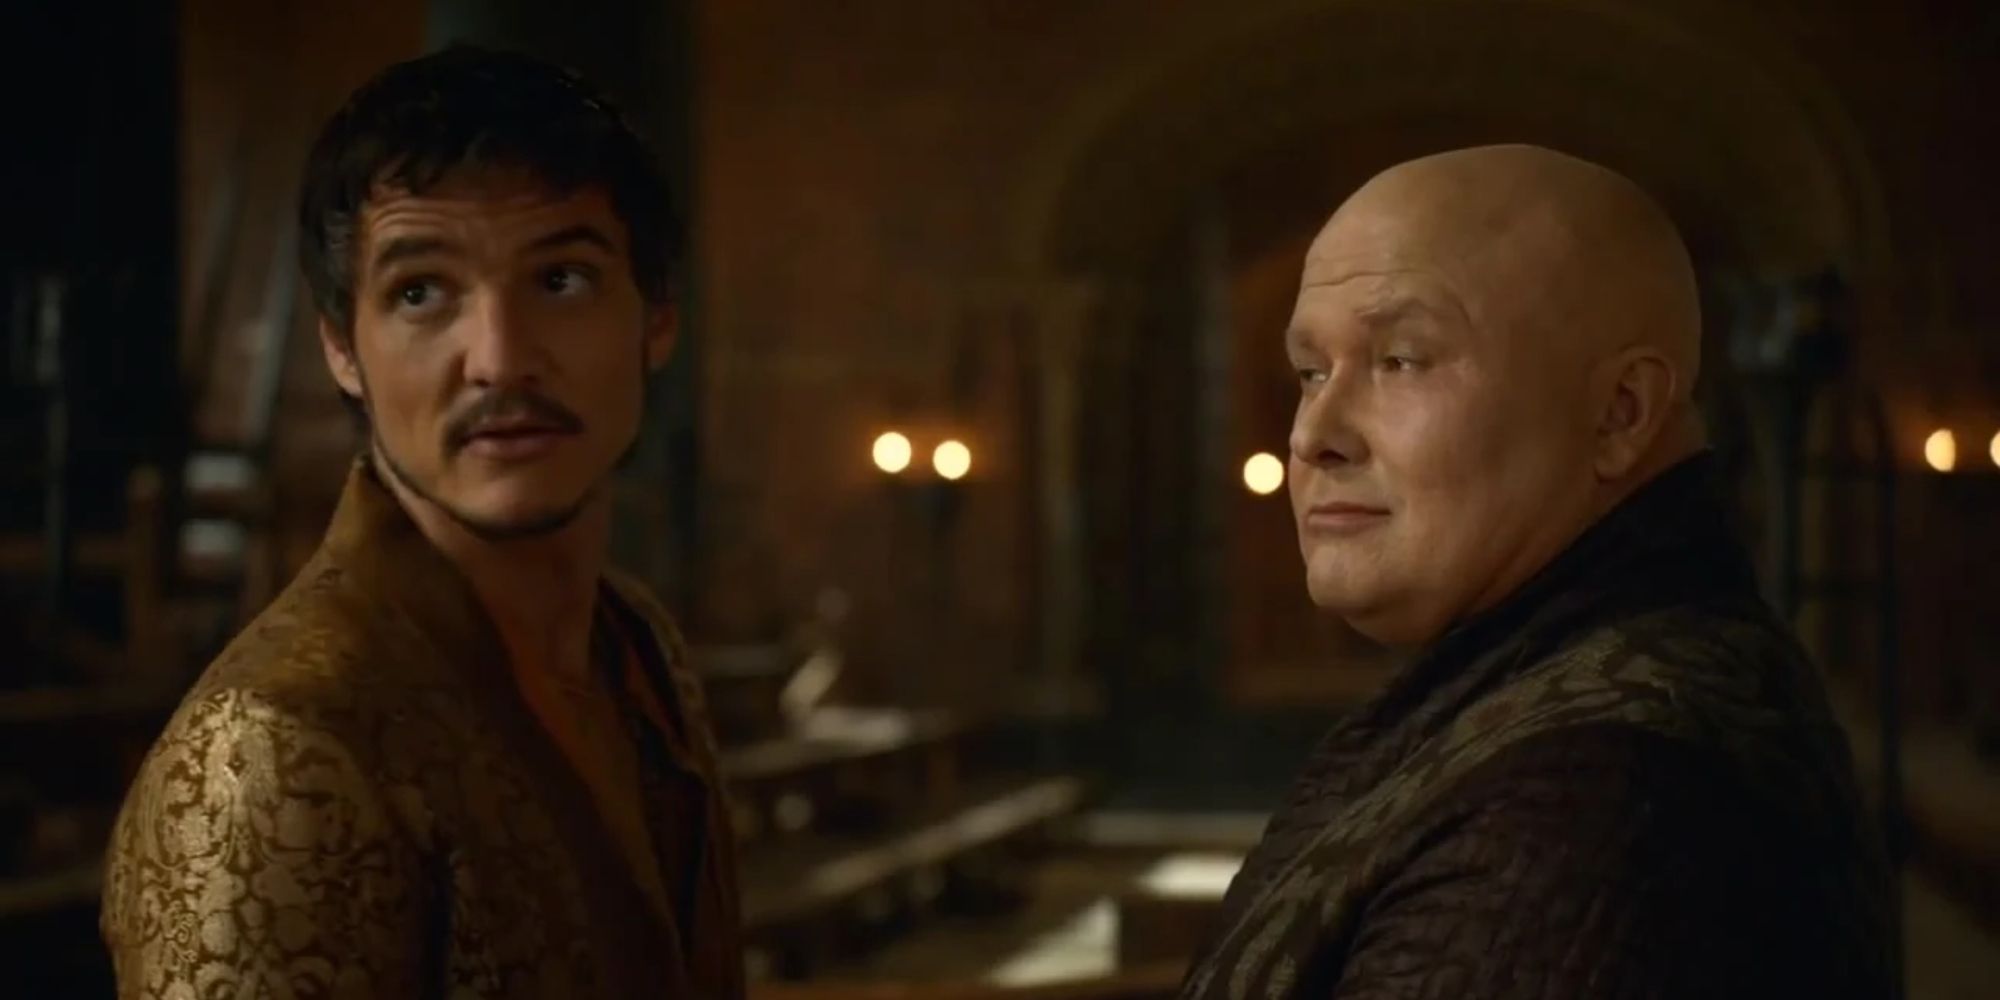 Oberyn and Varys speak in the Throne Room in Game of Thrones